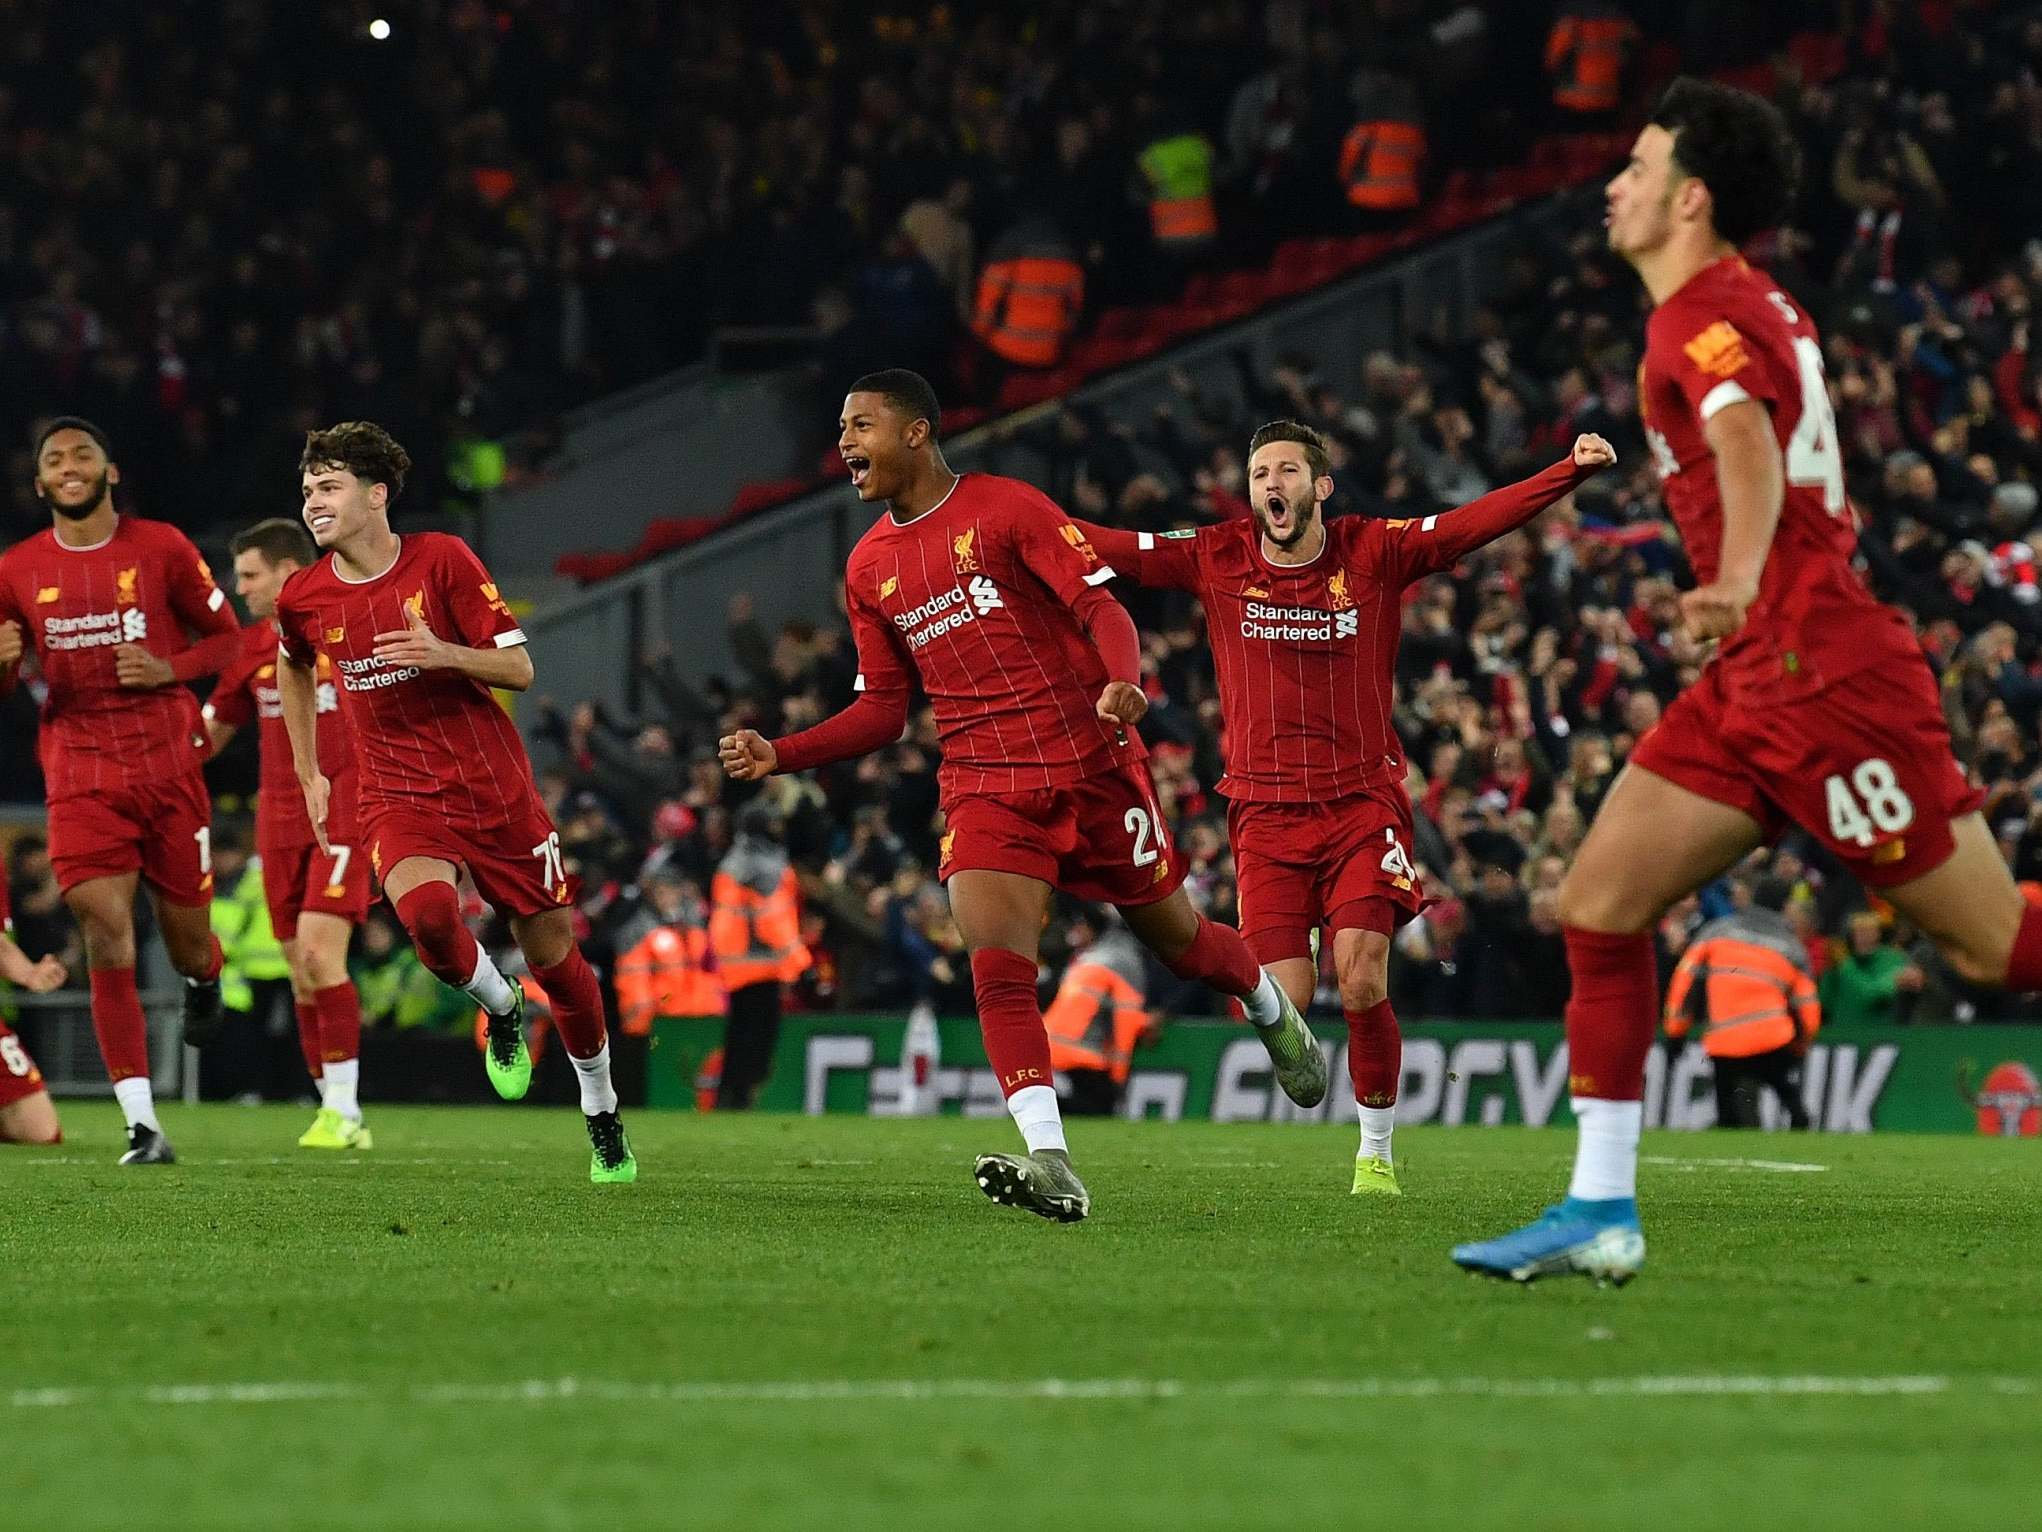 Liverpool won a thrilling game at Anfield on Wednesday night